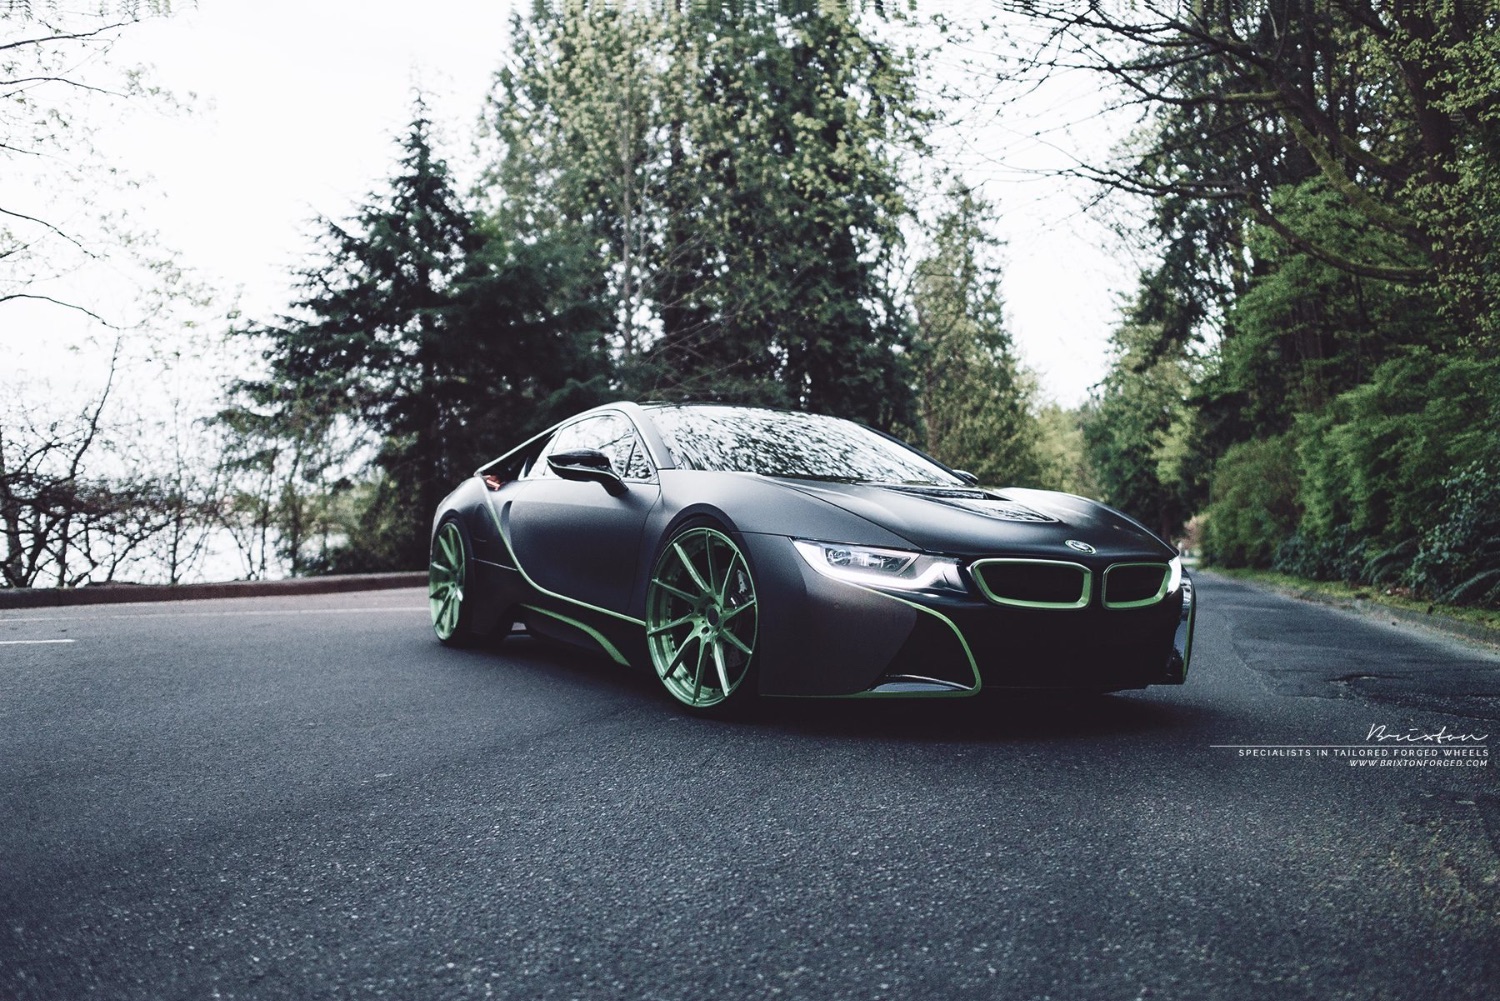 brixton-forged-black-bmw-i8-brixton-forged-r10d-duo-series-2-piece-forged-wheels-concave-green-09-1800x1202